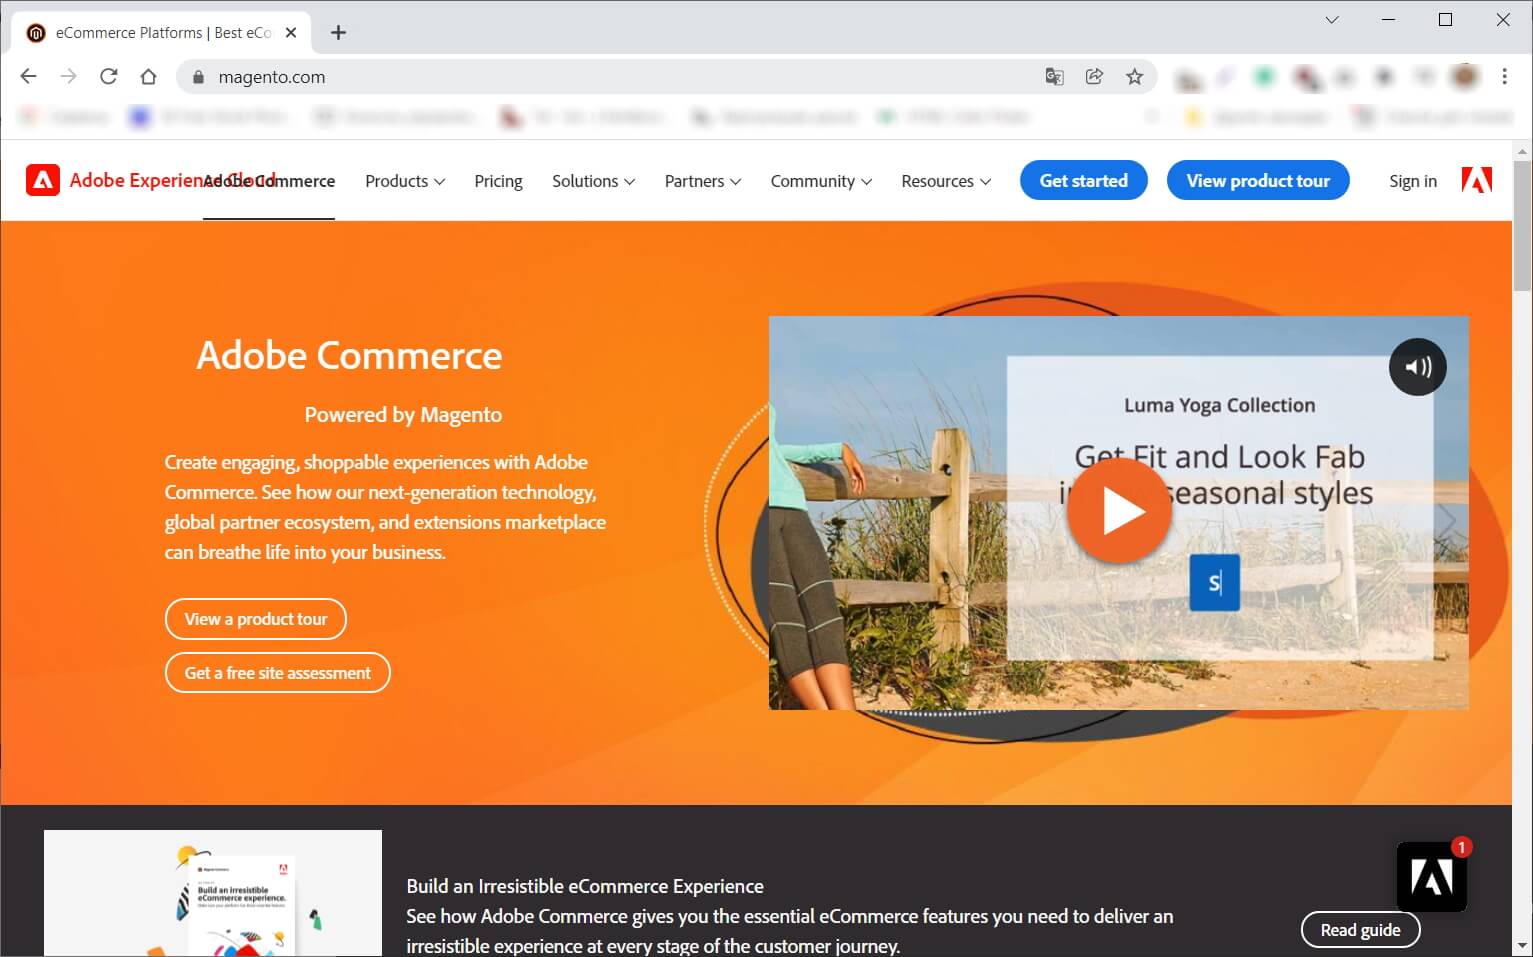 Adobe commerce powered by Magento